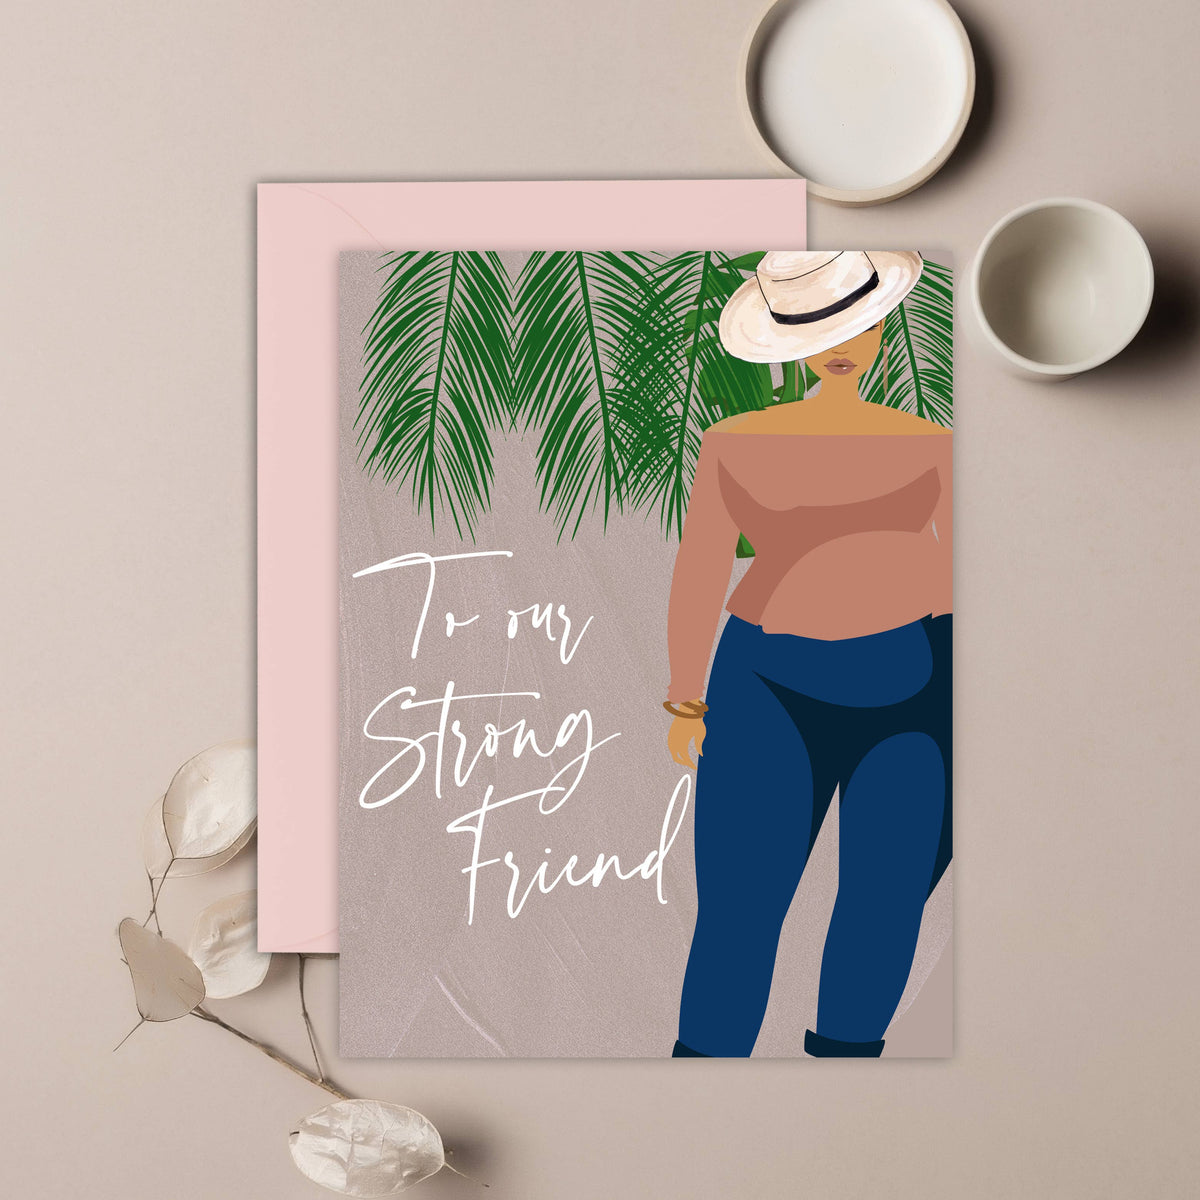 To Our Strong Friend Greeting Card